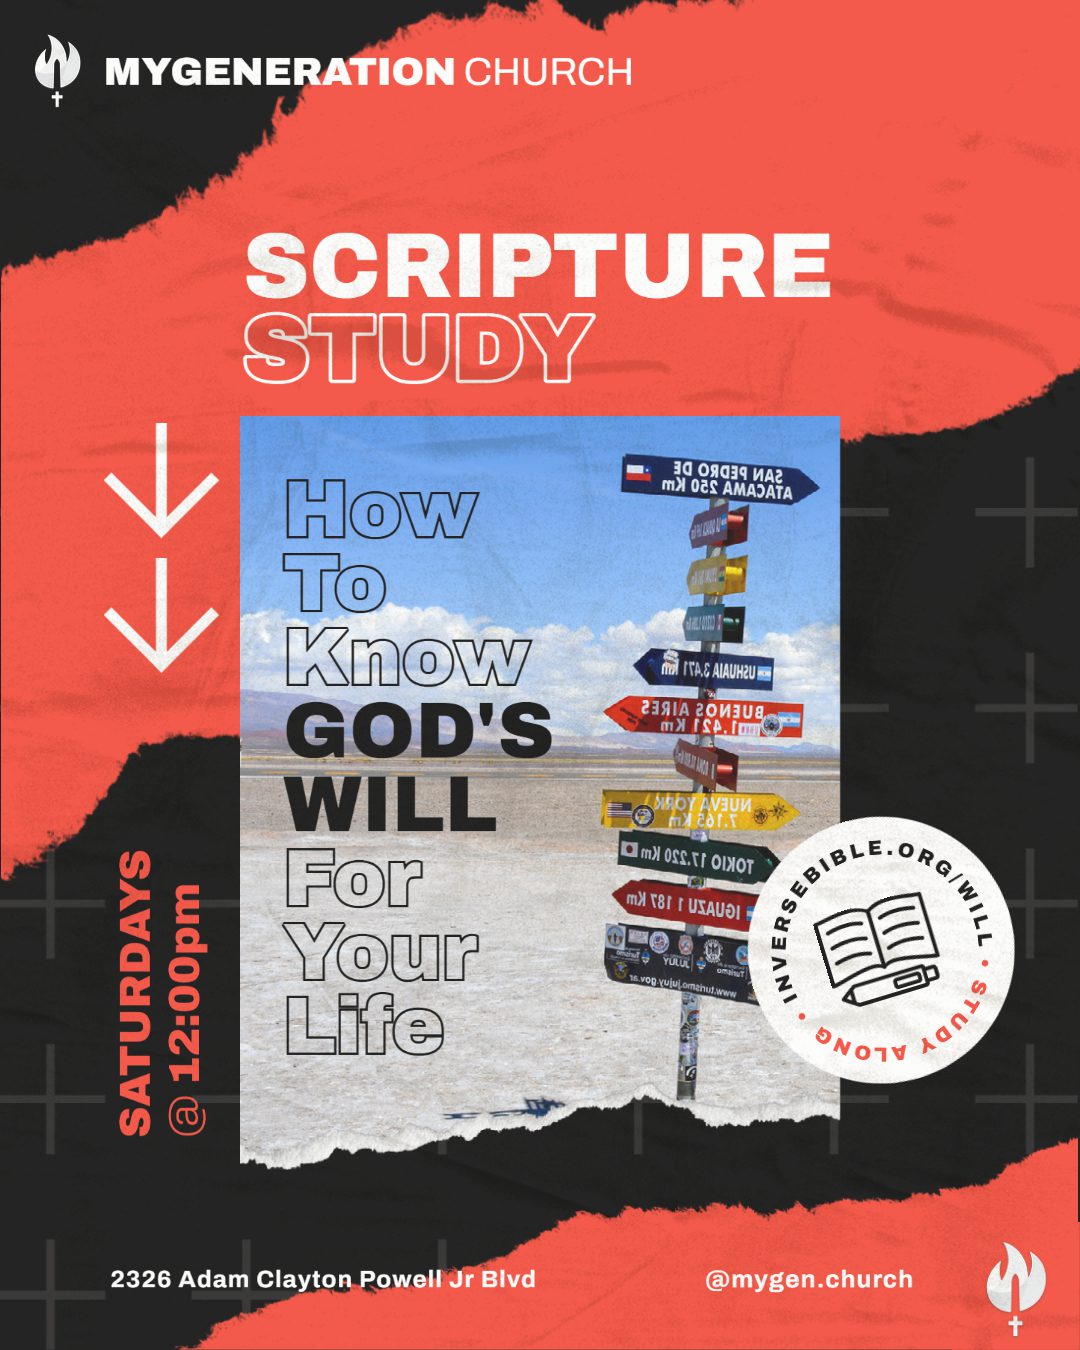 Scripture Study - How To Know God's Will For Your Life